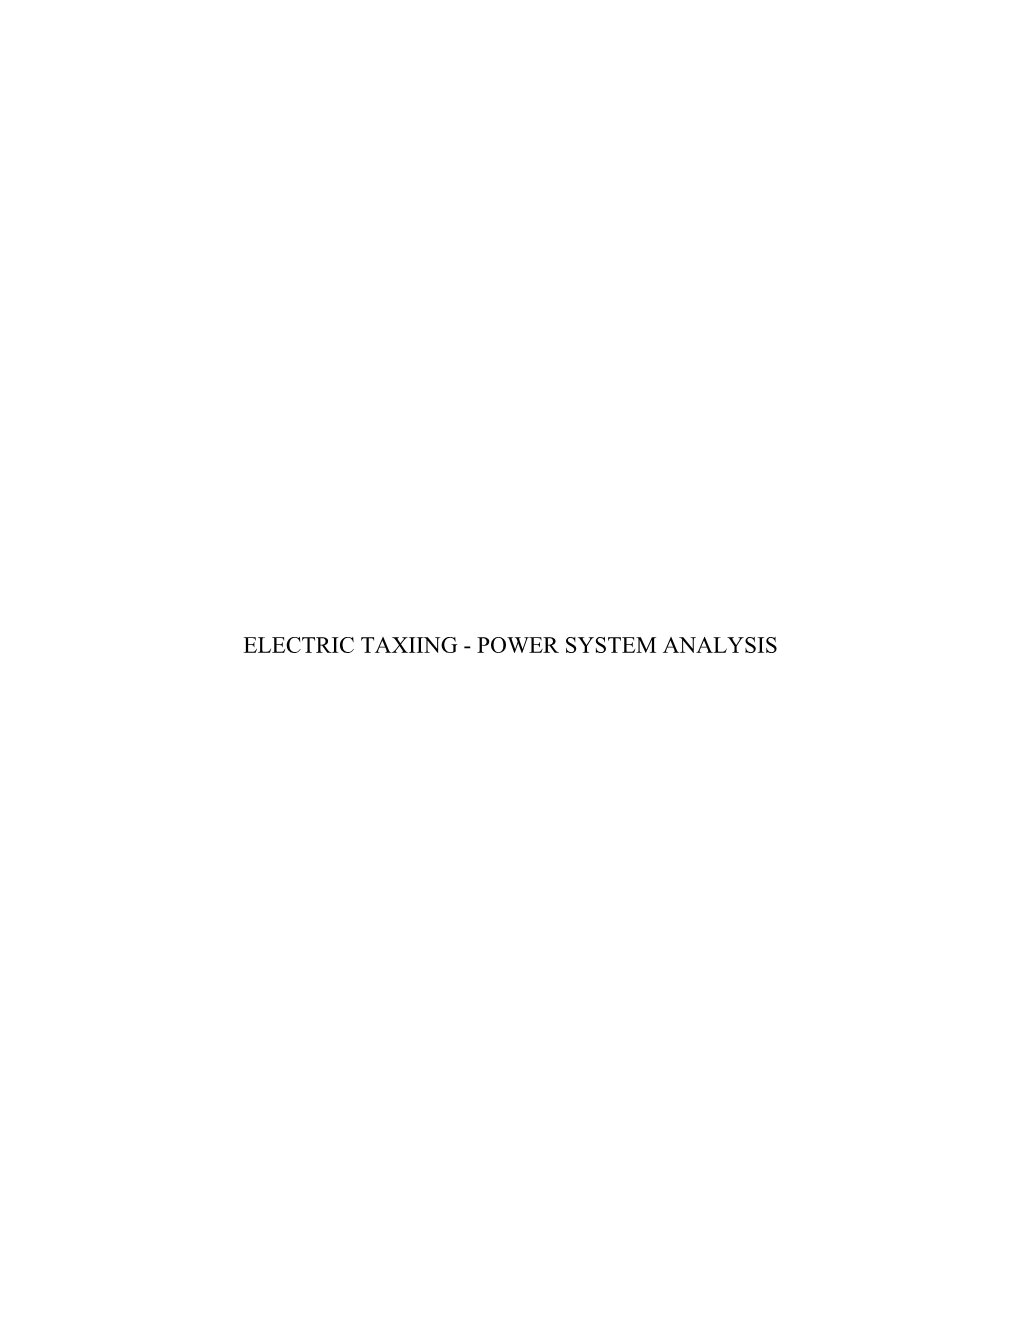 On the Concept of Electric Taxiing for Midsize Commercial Aircraft: a Power System and Architecture Investigation